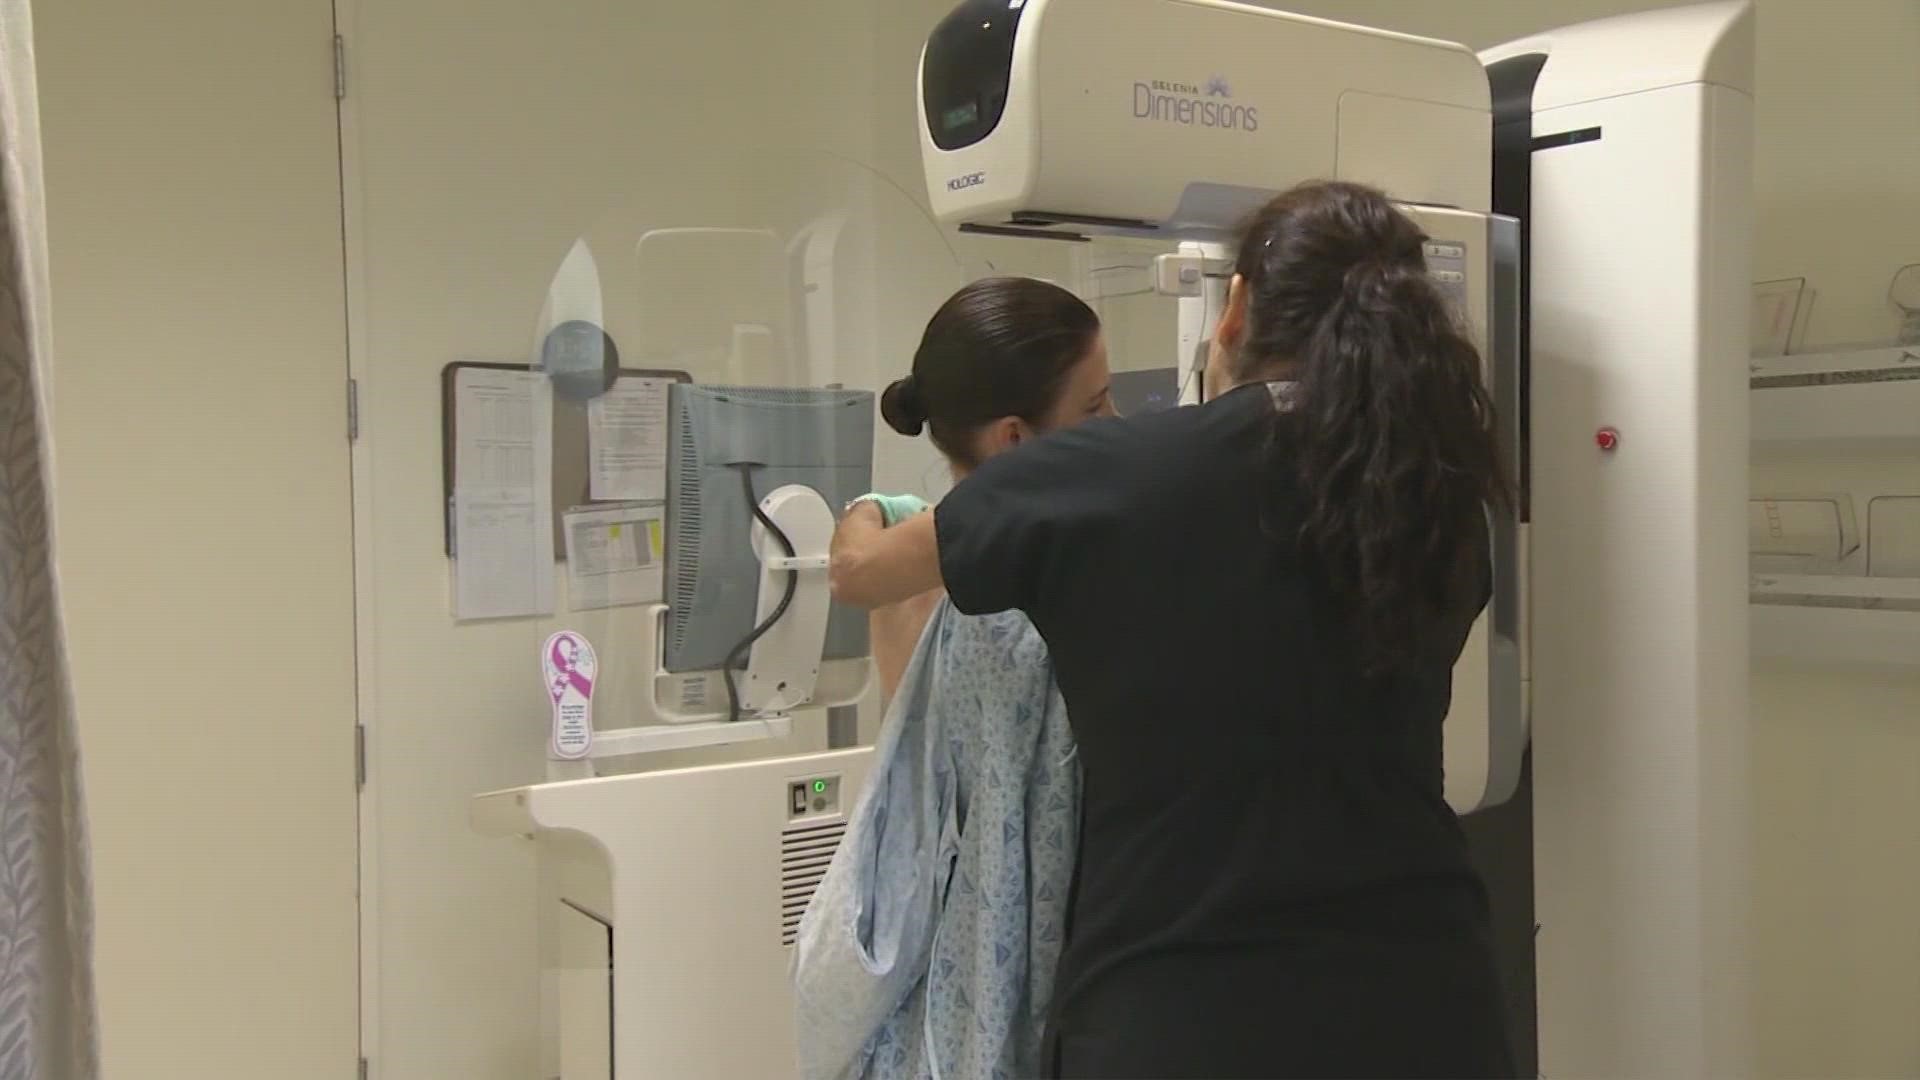 People who get a booster shot could have swollen lymph nodes for weeks. One Houston doctor says that shouldn't impact decisions on vaccines or mammograms.